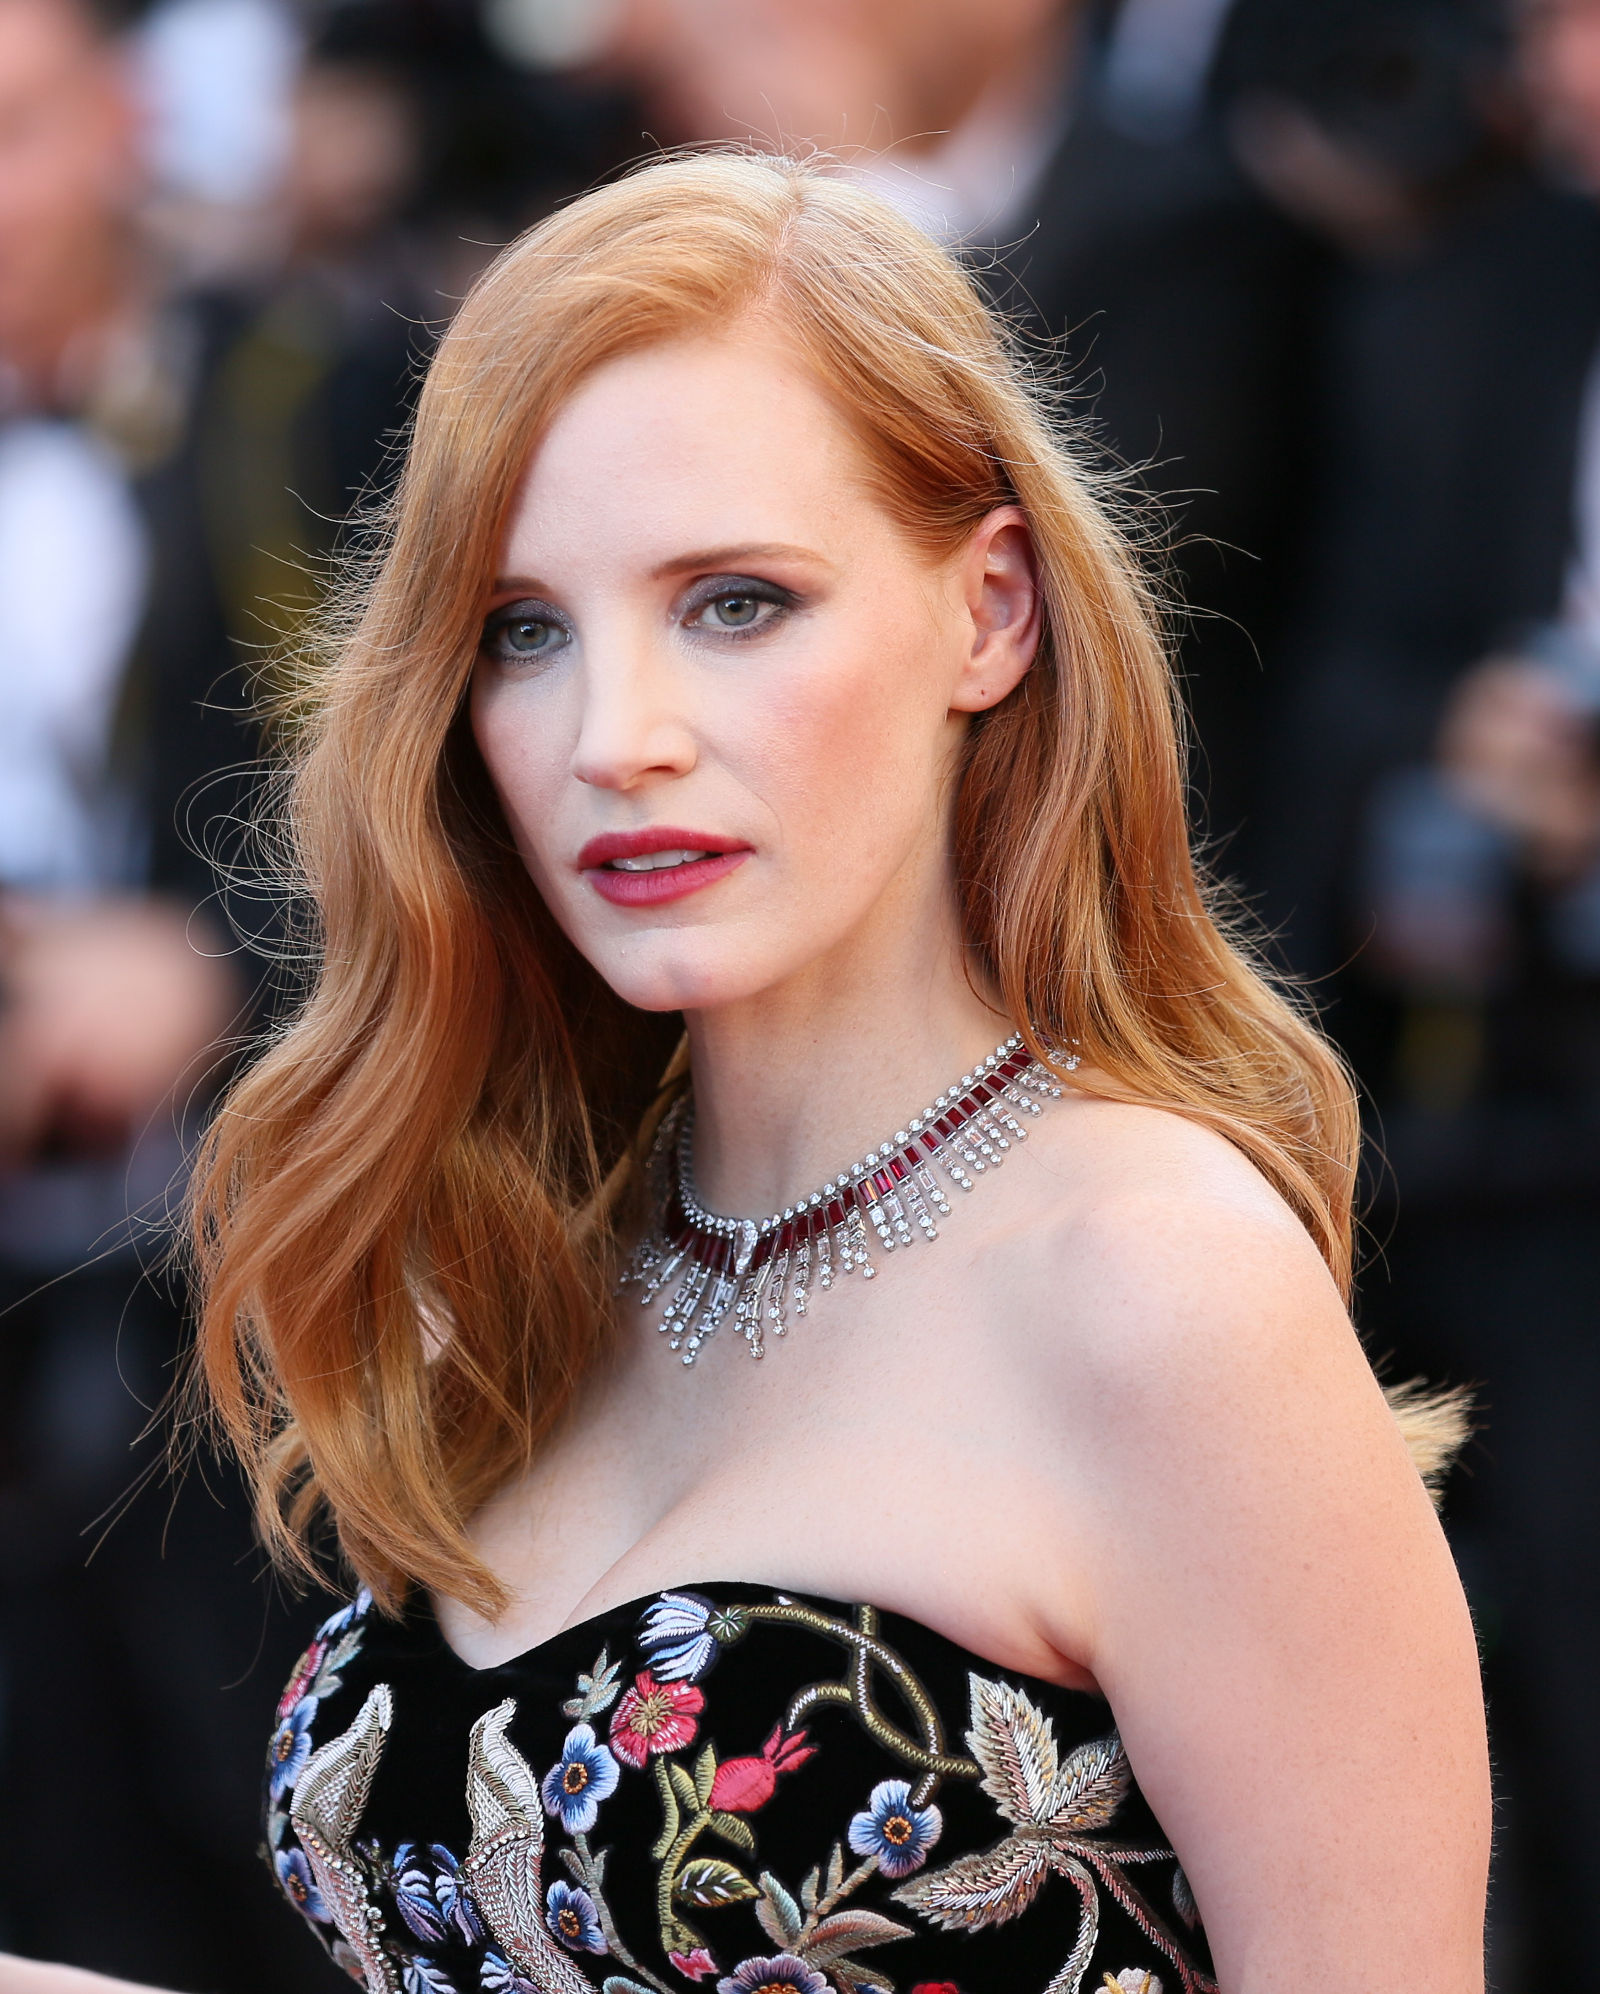 Trending Now: Strawberry Blonde Looks That Suit All Complexions